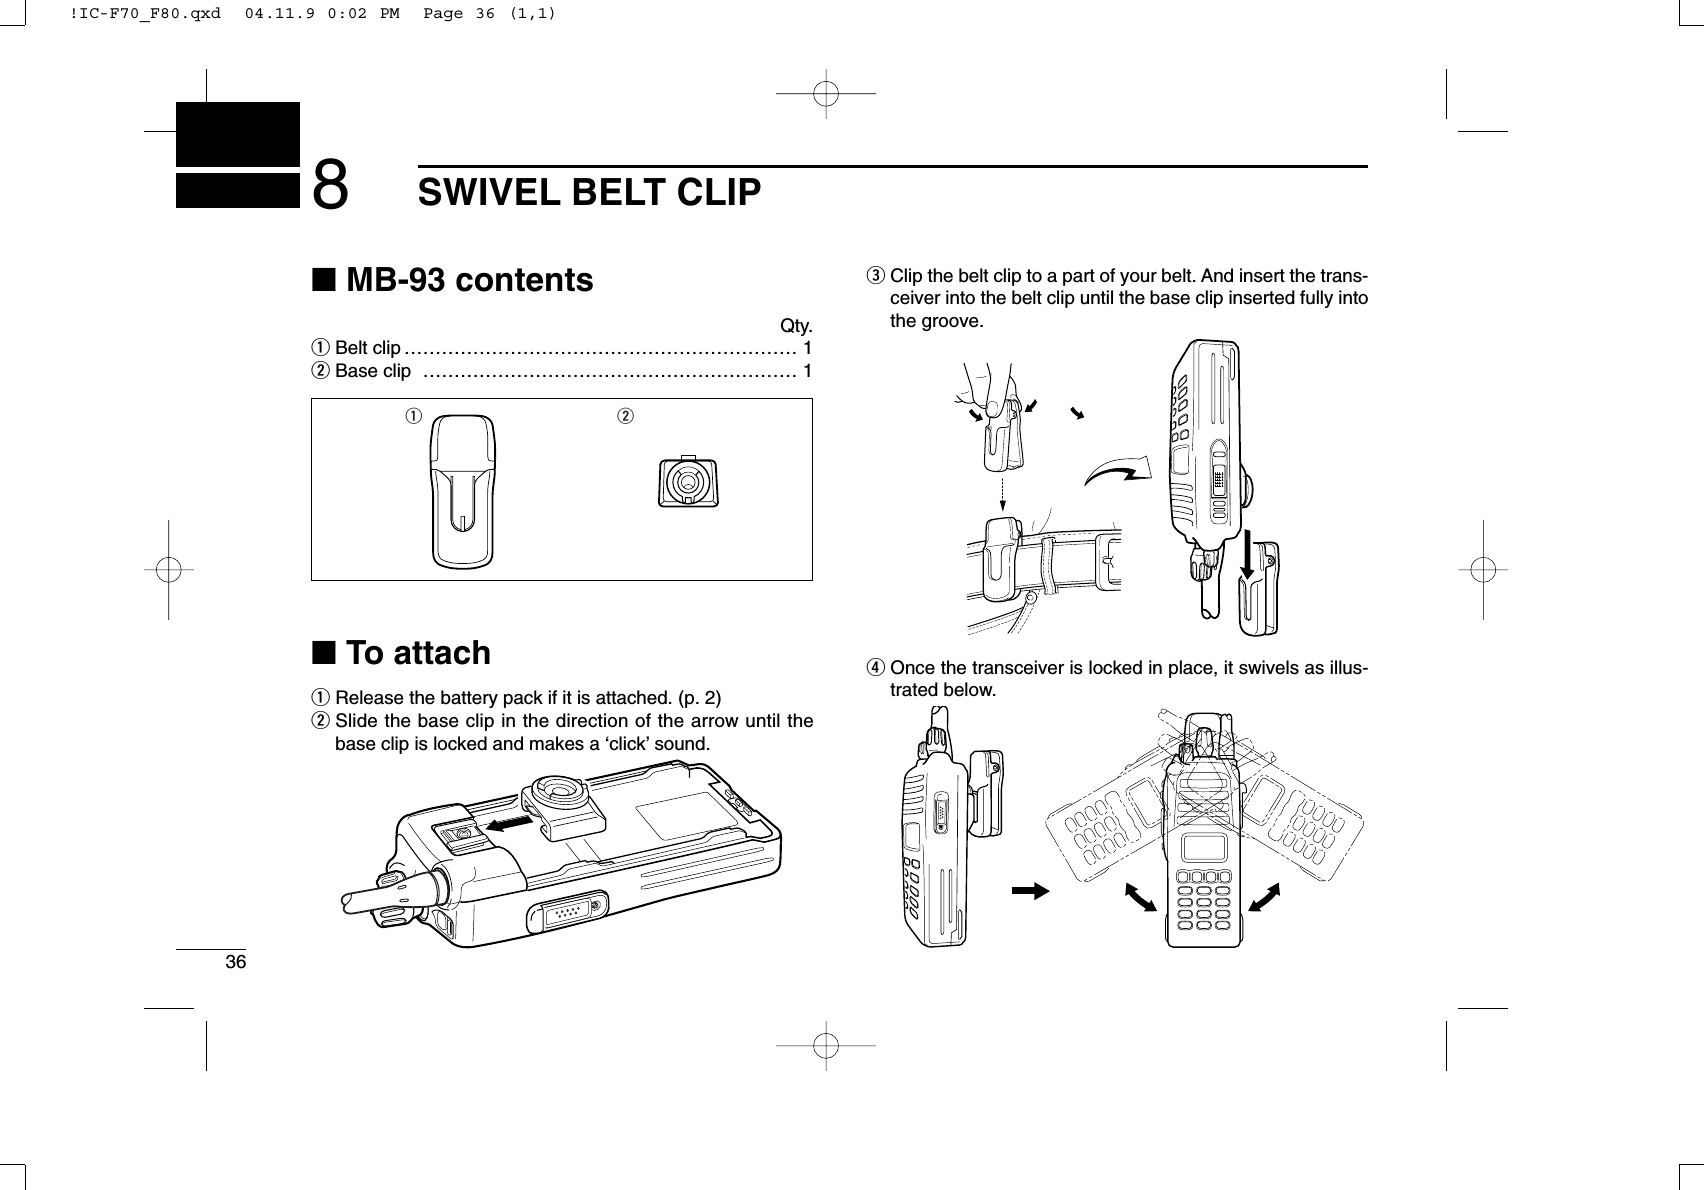 368SWIVEL BELT CLIP■MB-93 contentsQty.qBelt clip ……………………………………………………… 1wBase clip …………………………………………………… 1■To attachqRelease the battery pack if it is attached. (p. 2)wSlide the base clip in the direction of the arrow until thebase clip is locked and makes a ‘click’sound.eClip the belt clip to a part of your belt. And insert the trans-ceiver into the belt clip until the base clip inserted fully intothe groove.rOnce the transceiver is locked in place, it swivels as illus-trated below.q w!IC-F70_F80.qxd  04.11.9 0:02 PM  Page 36 (1,1)